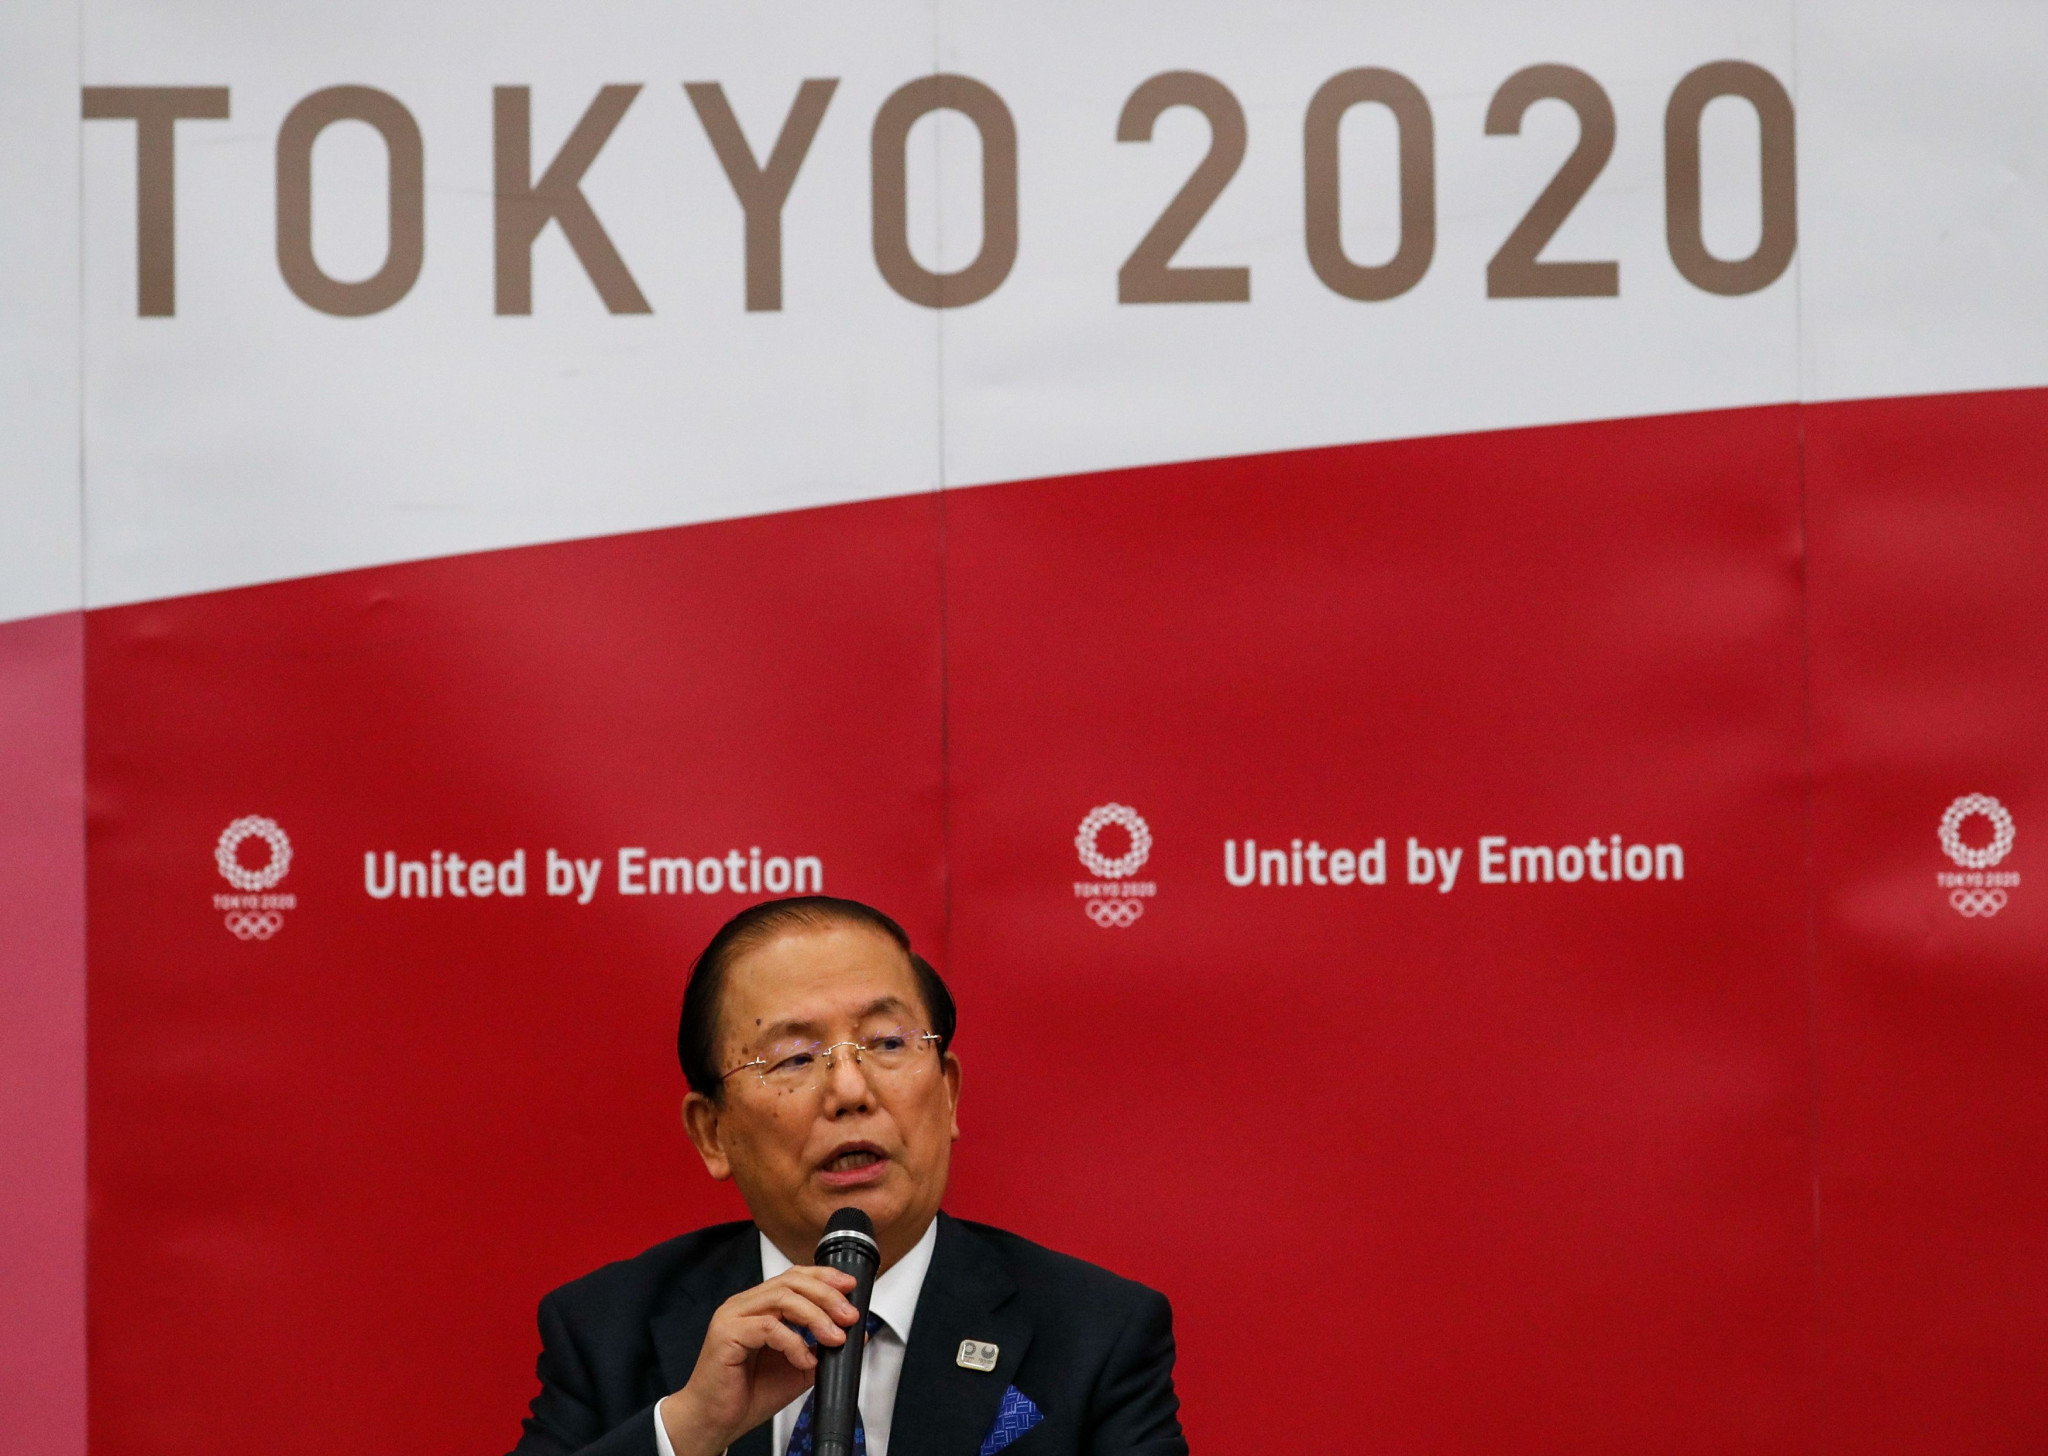 Tokyo 2020 chief executive Toshirō Mutō recently offered an update on organisers' progress ©Getty Images